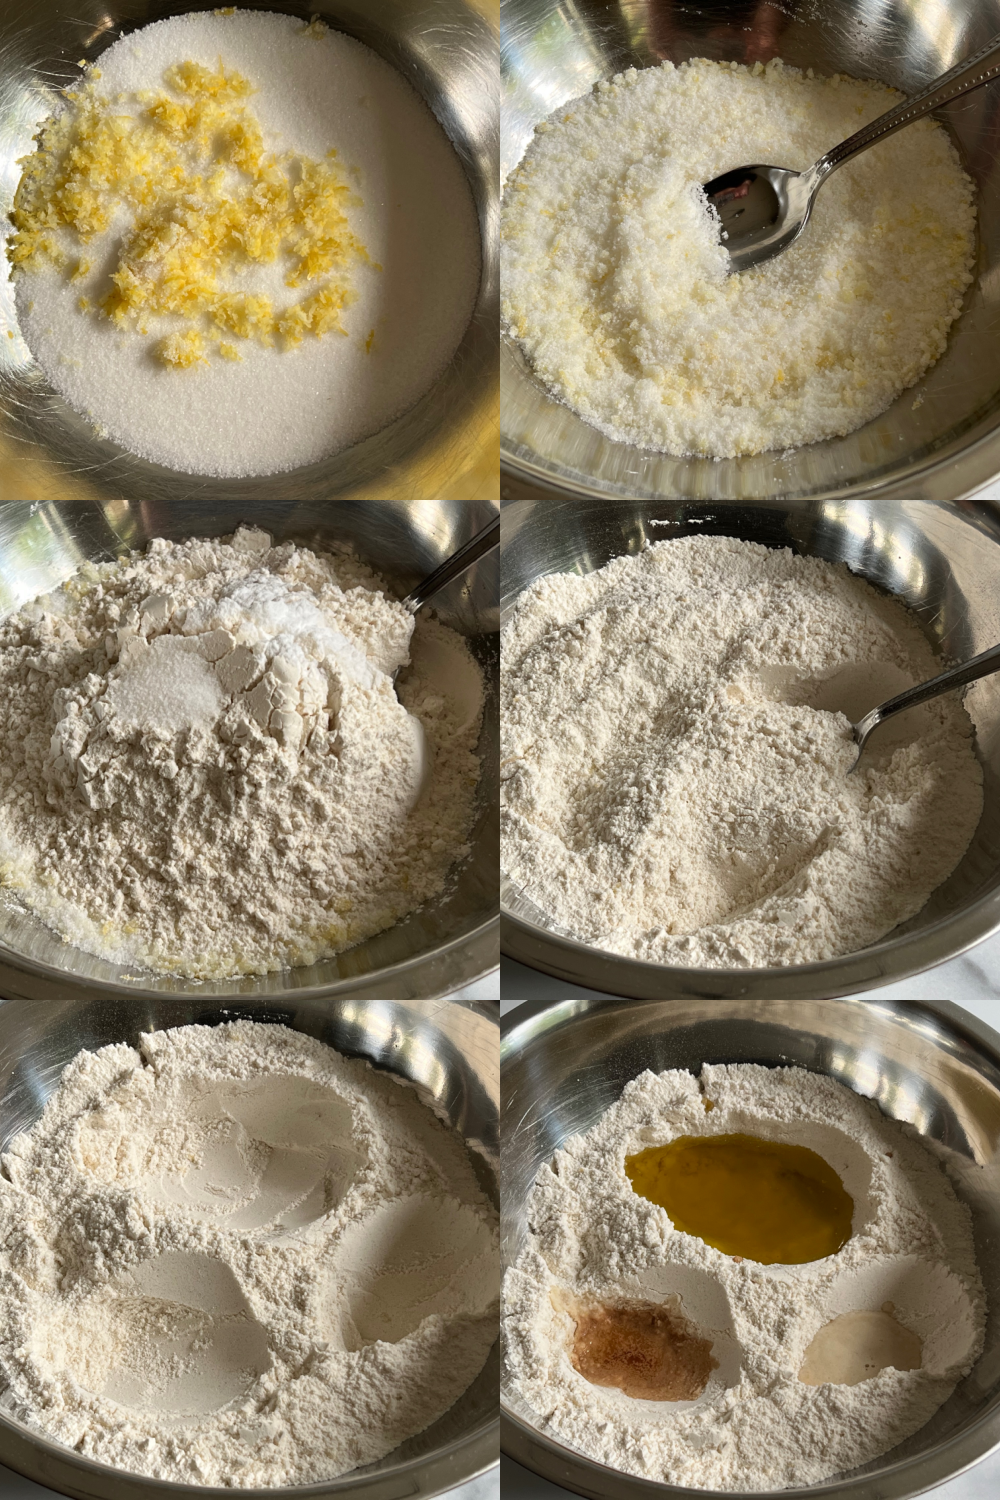 This is a six photo collage showing the cake batter being made in a large silver mixing bowl. 